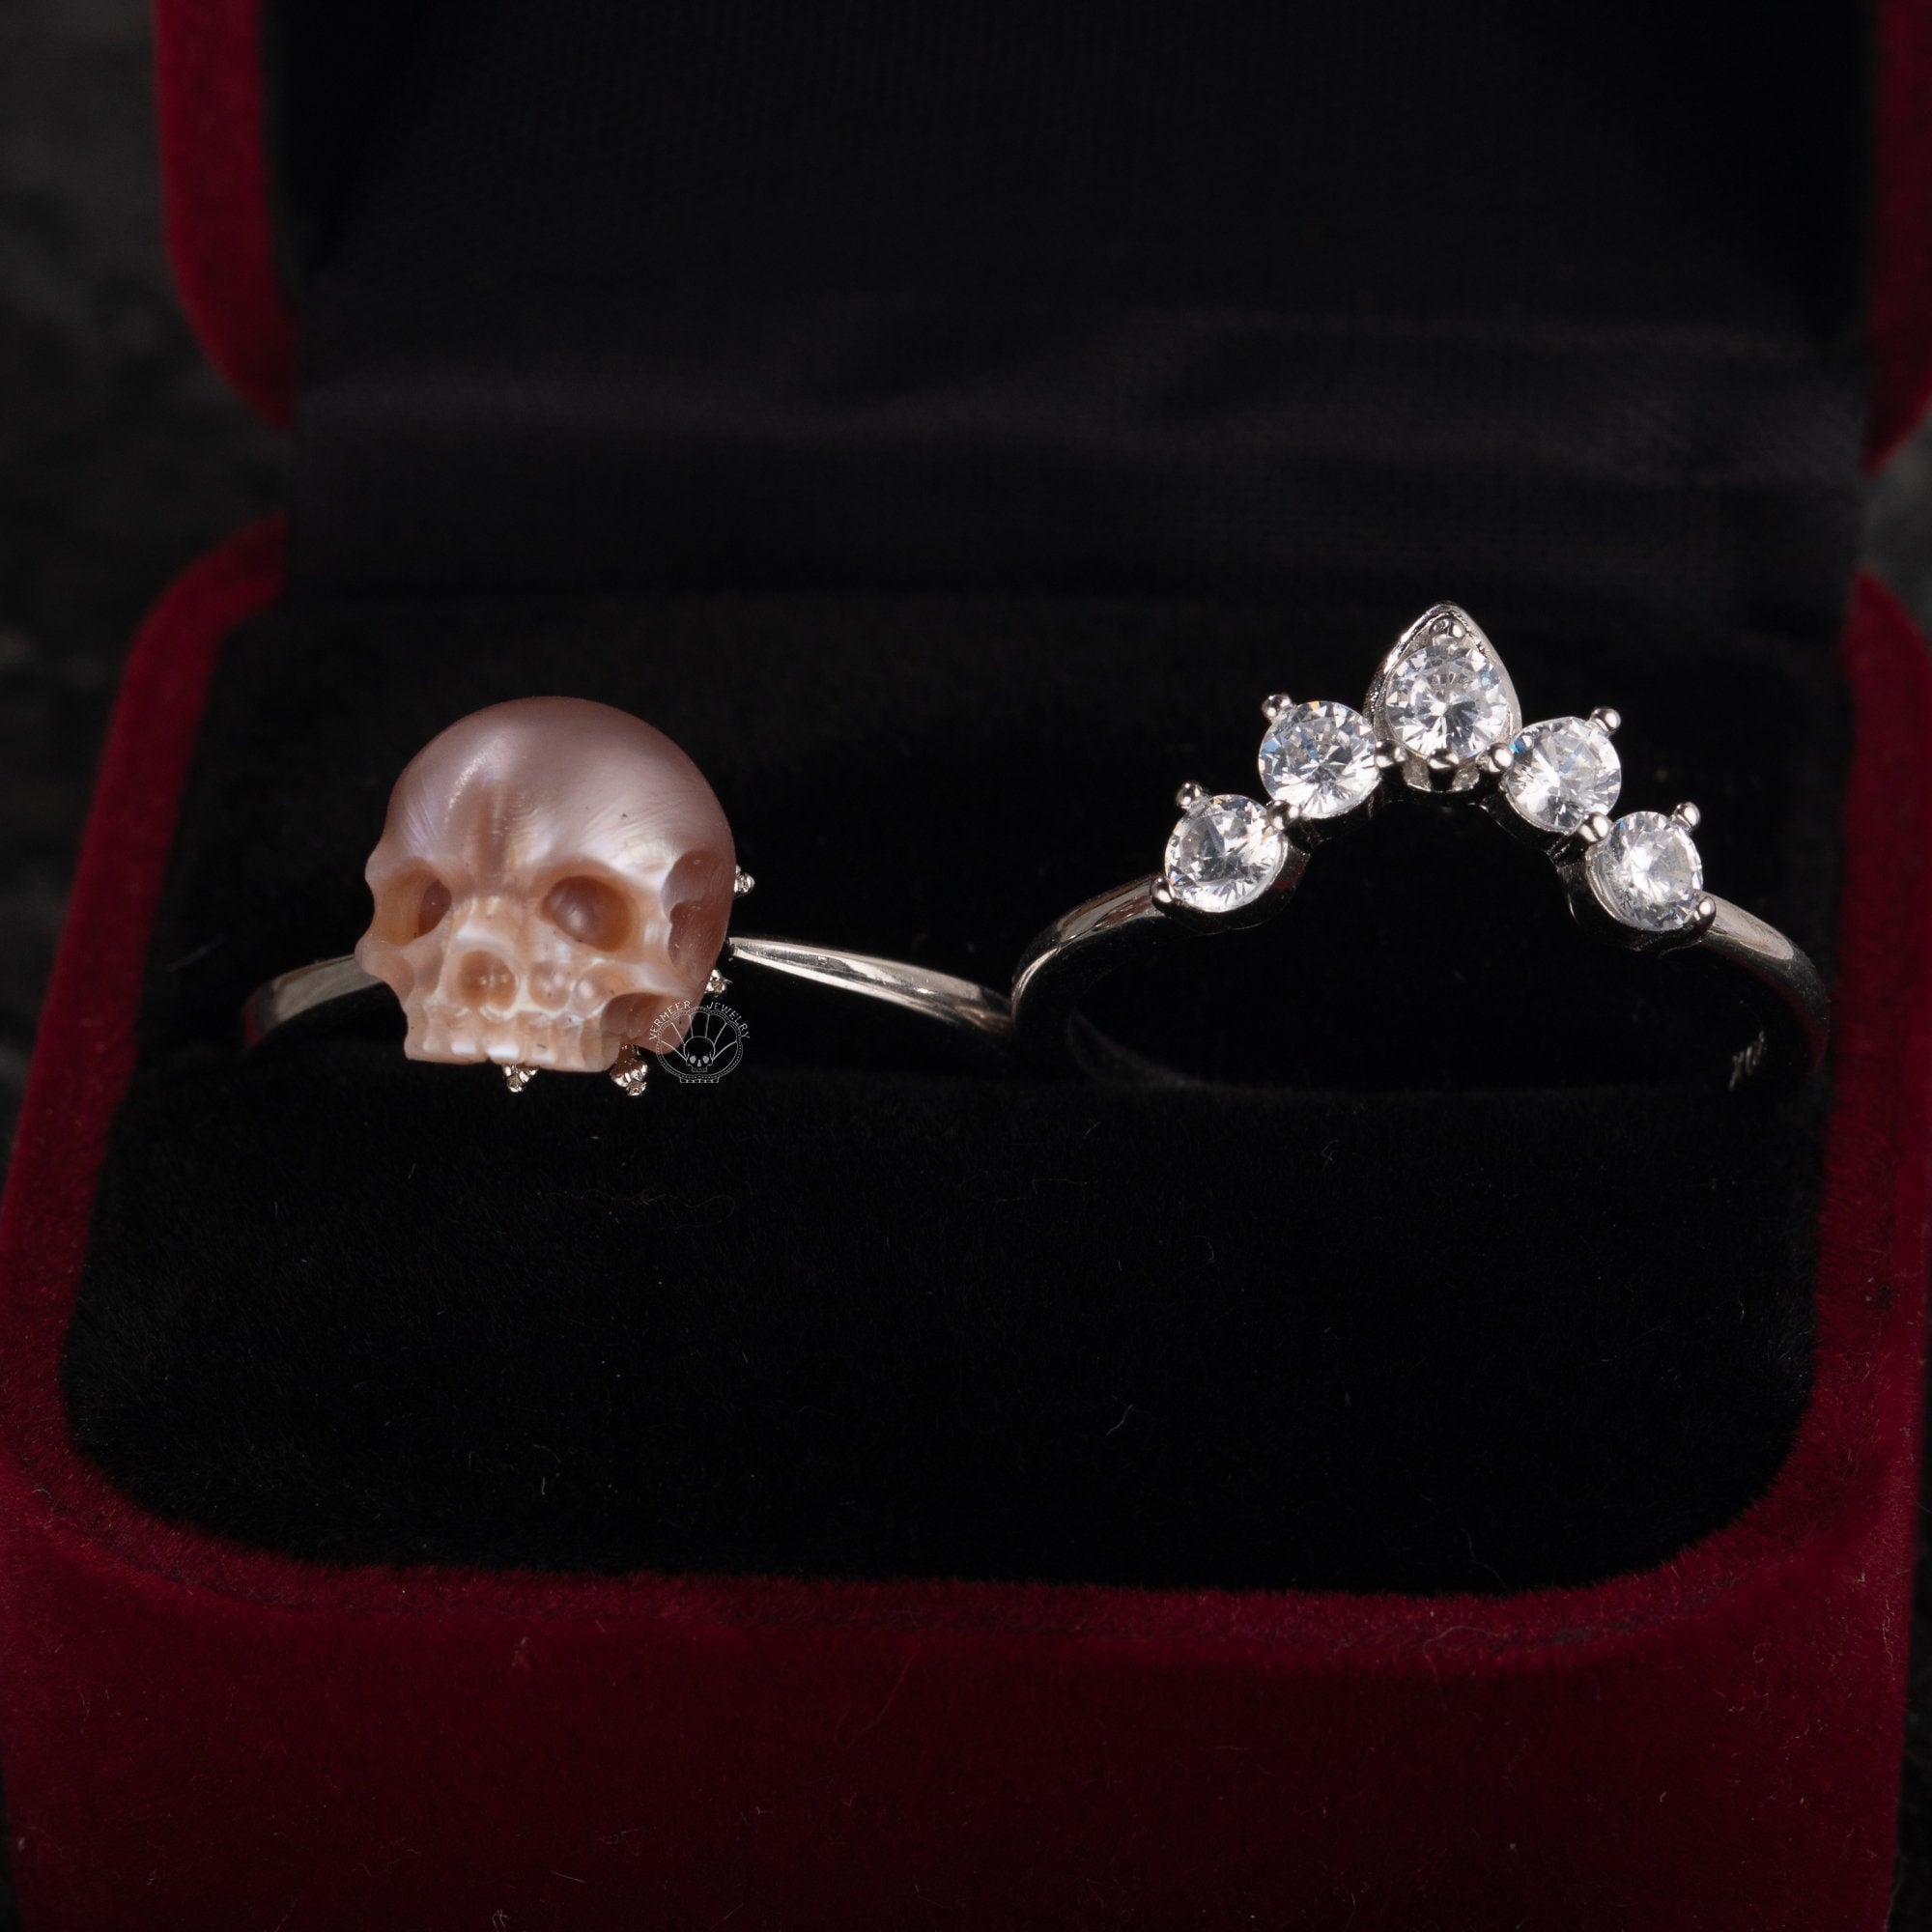 pearl skull ring ''be my queen'' skull with crown 2 pieces sterling silver rings gothic dark jewelry engagement ring for wedding